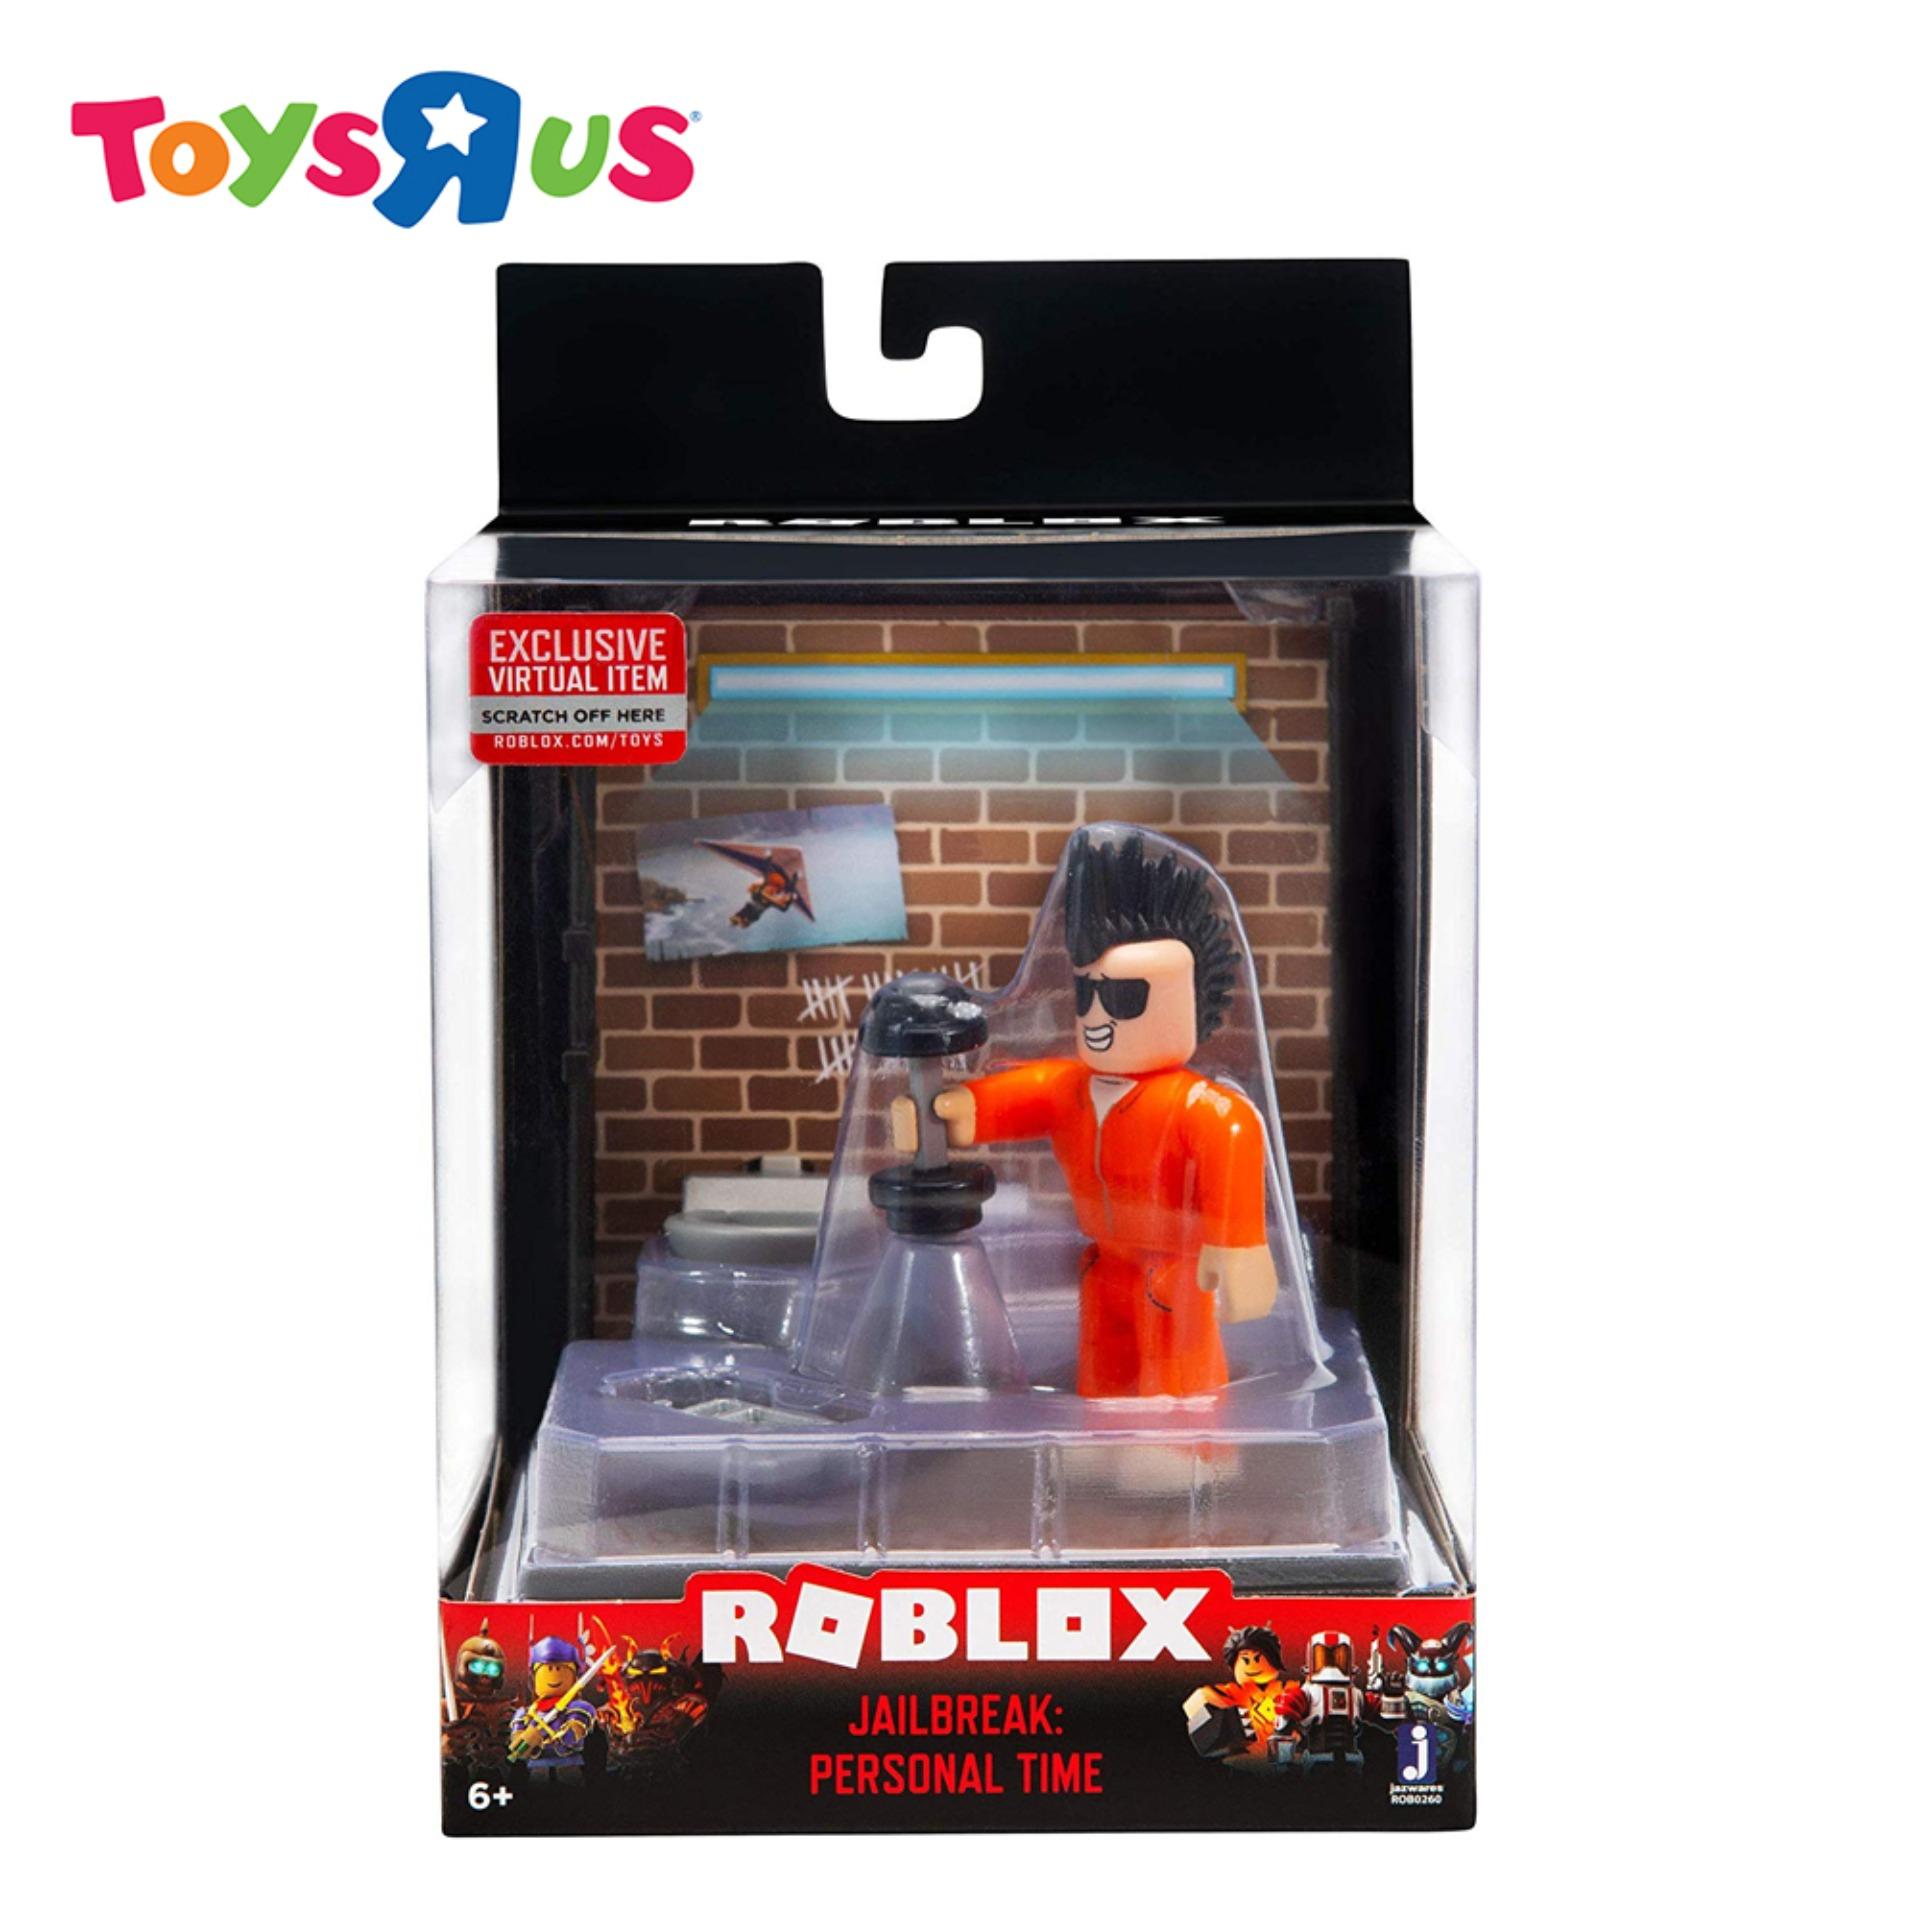 Roblox Jailbreak Personal Time Buy Sell Online Mini Figures With Cheap Price Lazada Ph - roblox toys lazada